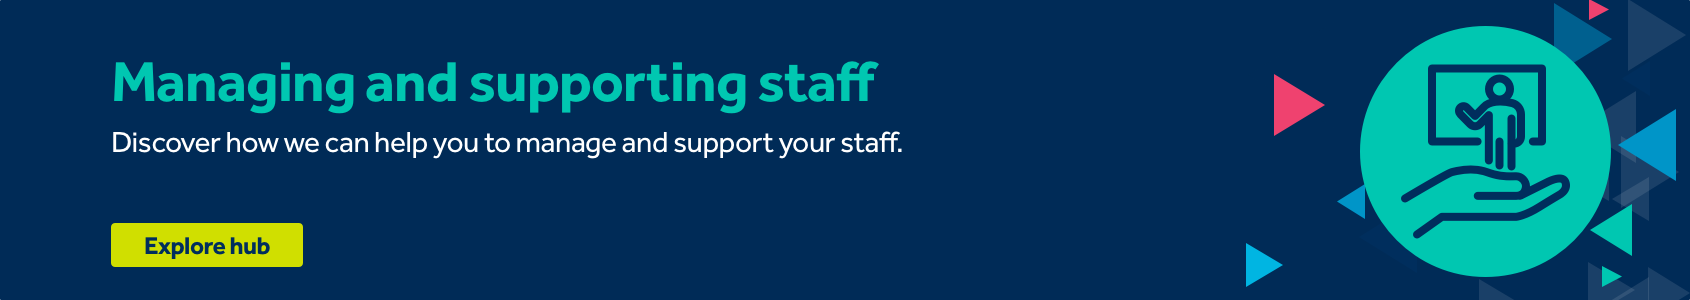 Discover how we can help you to manage and support your staff. https://www.tes.com/for-schools/coronavirus-support/staff-wellbeing